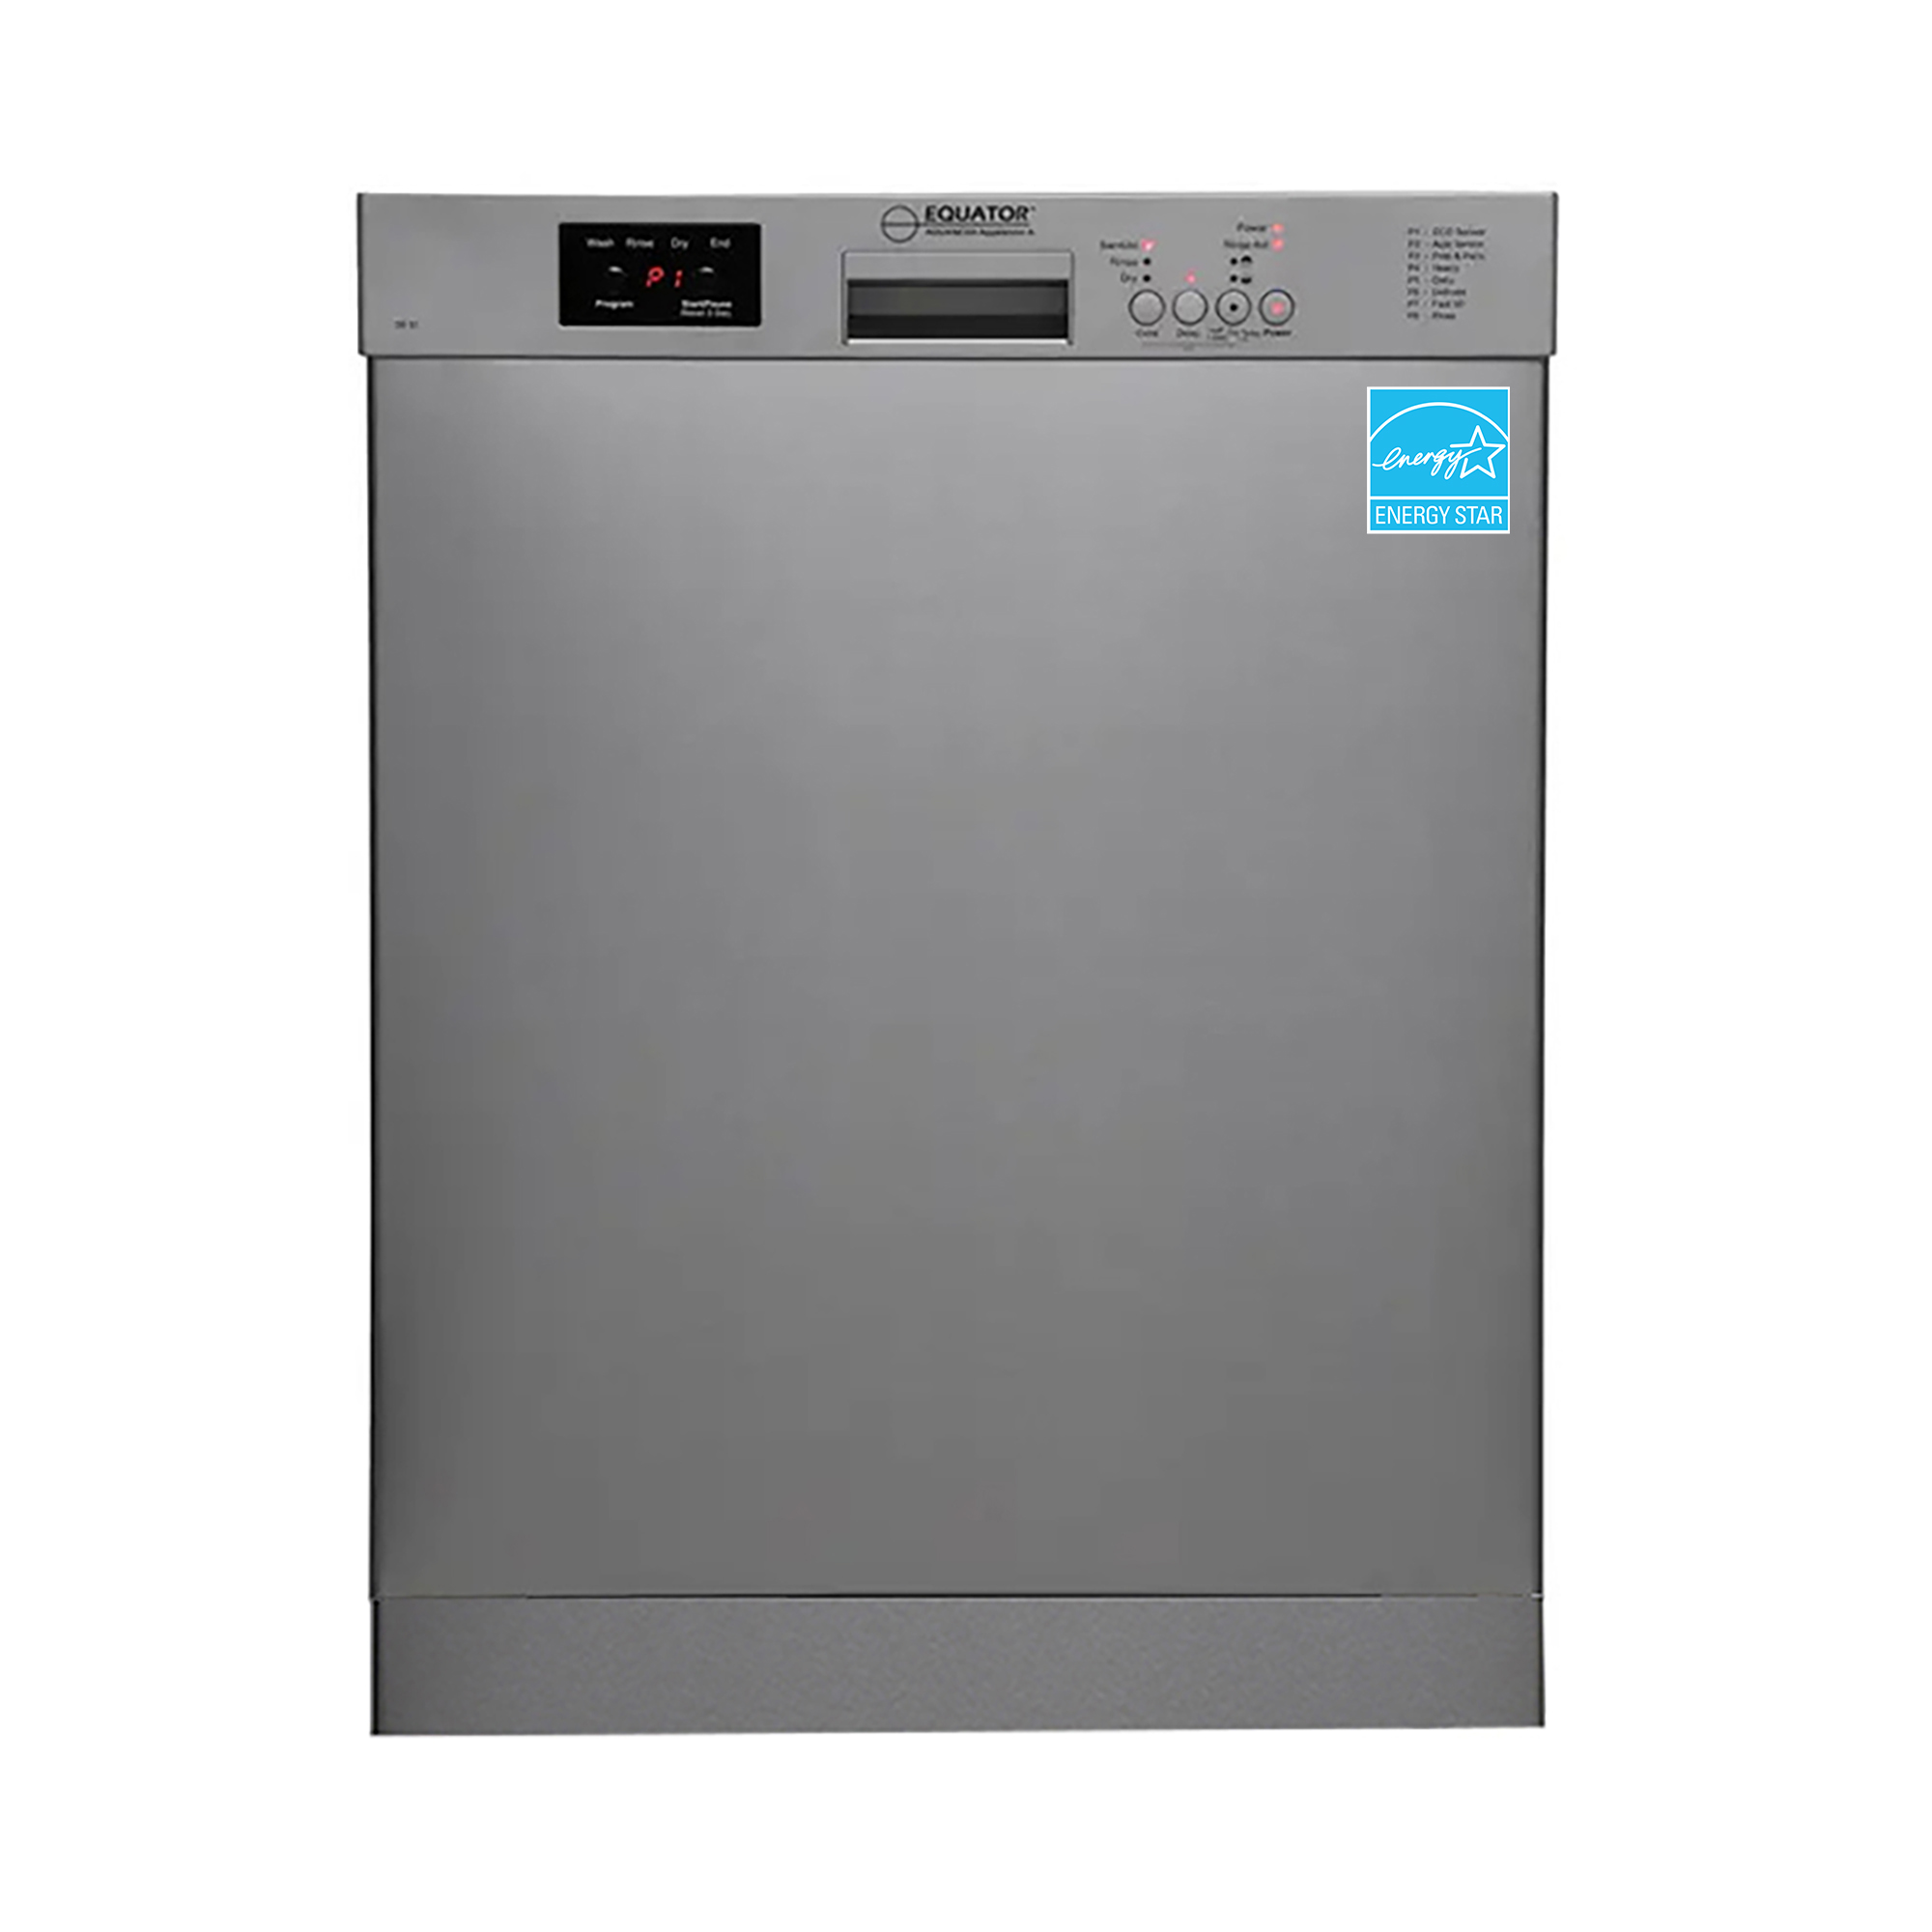 Equator 24 in Dishwasher 14 pl SANITIZE 150F Water 3.4g Quiet 51 dB 120V E-Star Silver